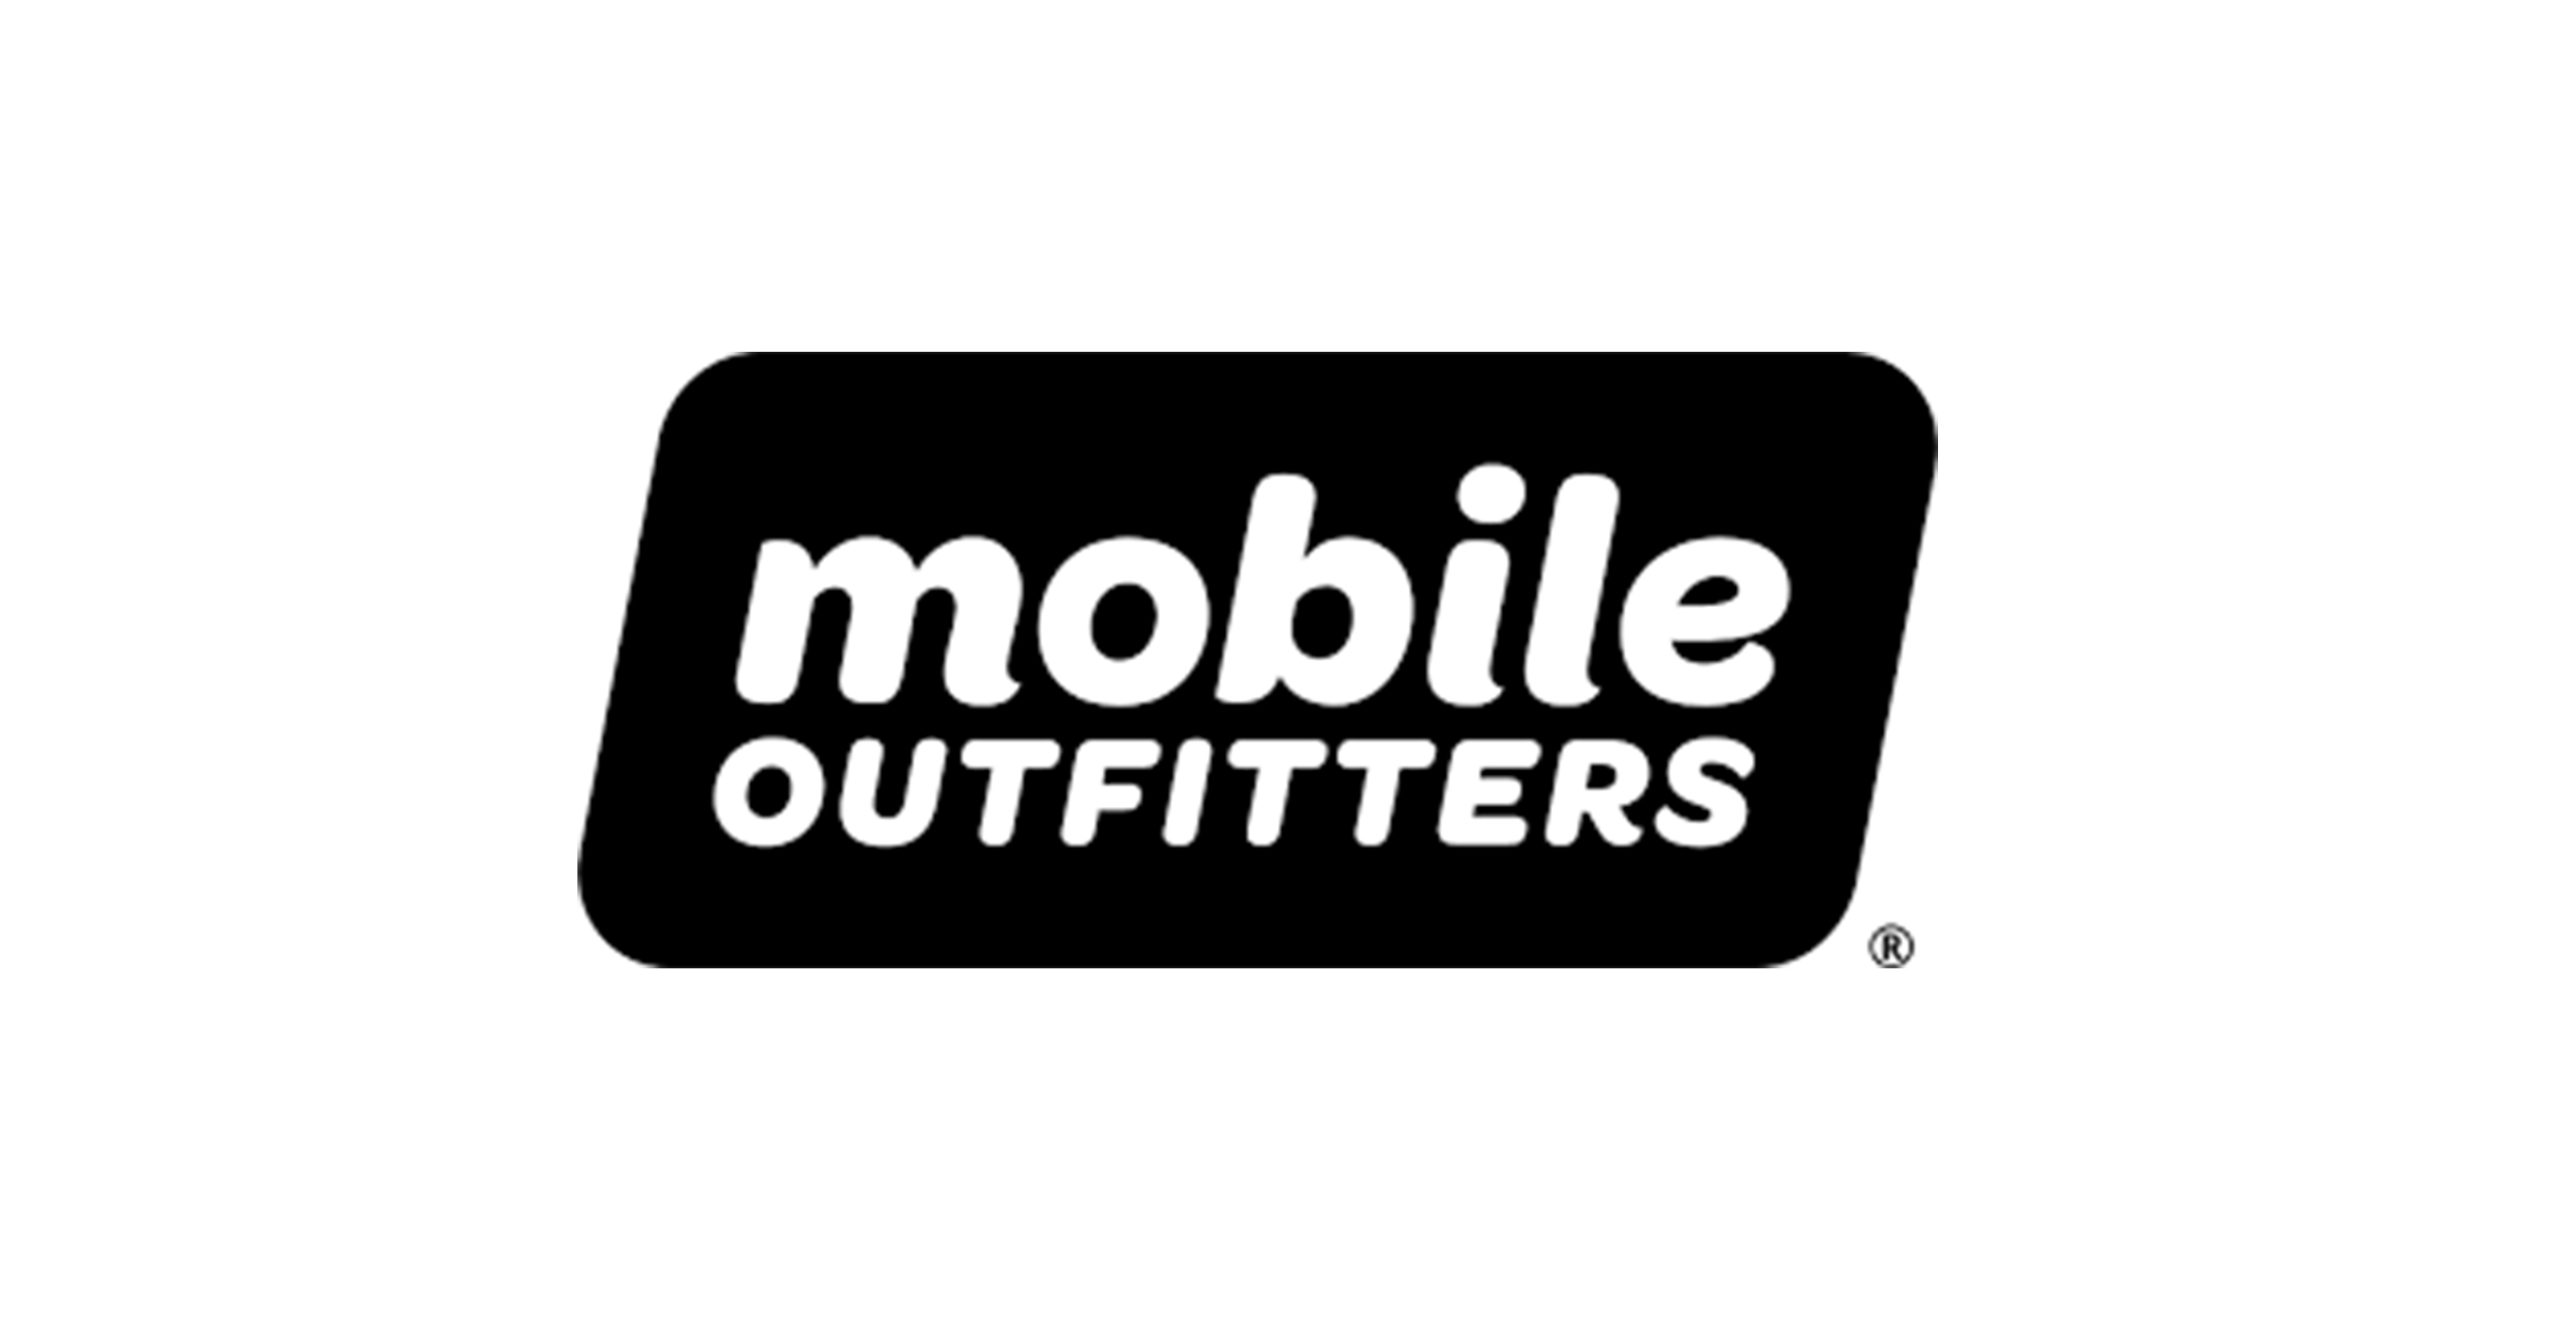 Mobile Outfitters